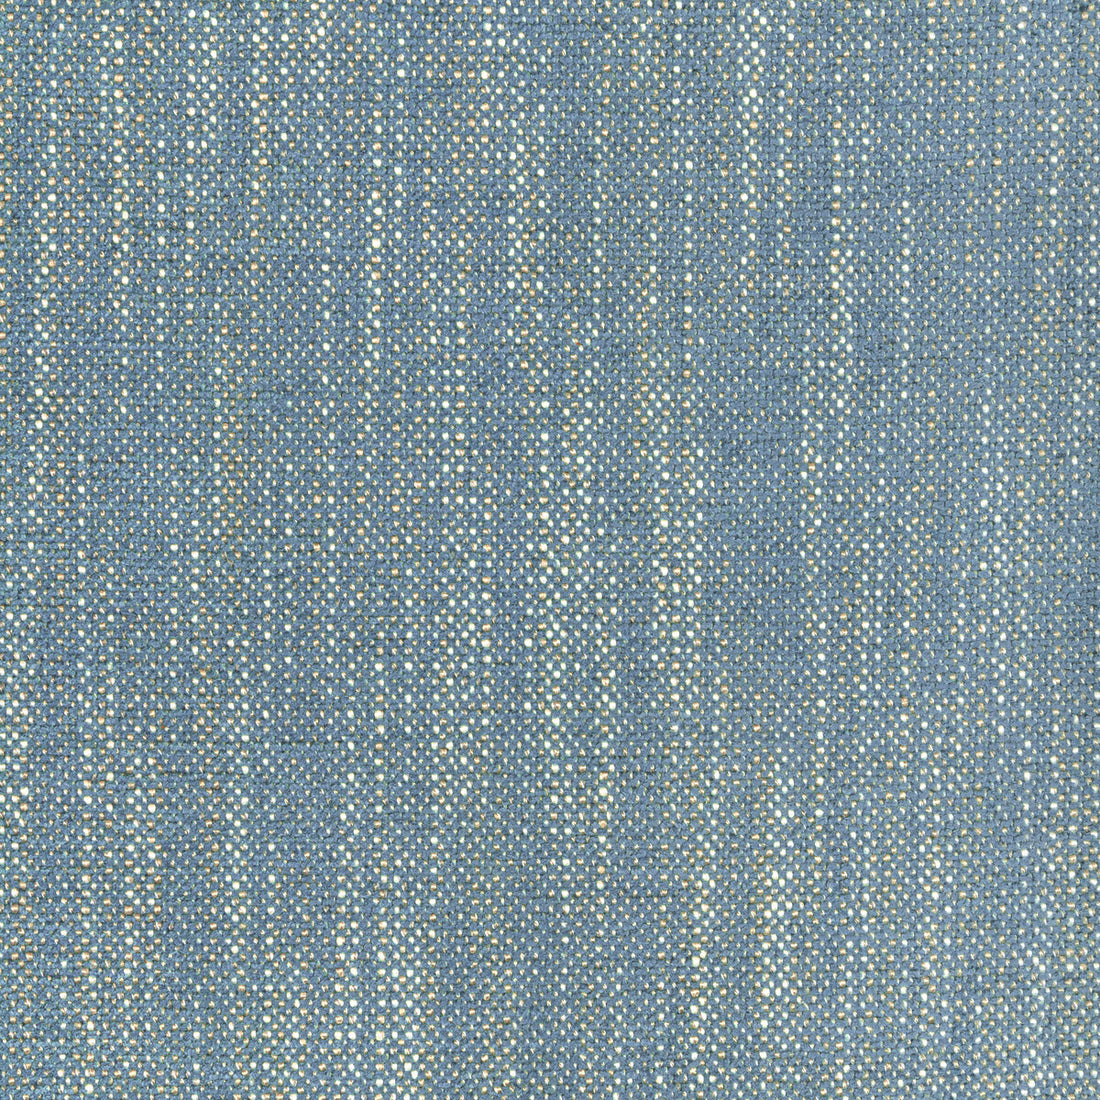 Kravet Design fabric in 36408-5 color - pattern 36408.5.0 - by Kravet Design in the Performance Crypton Home collection